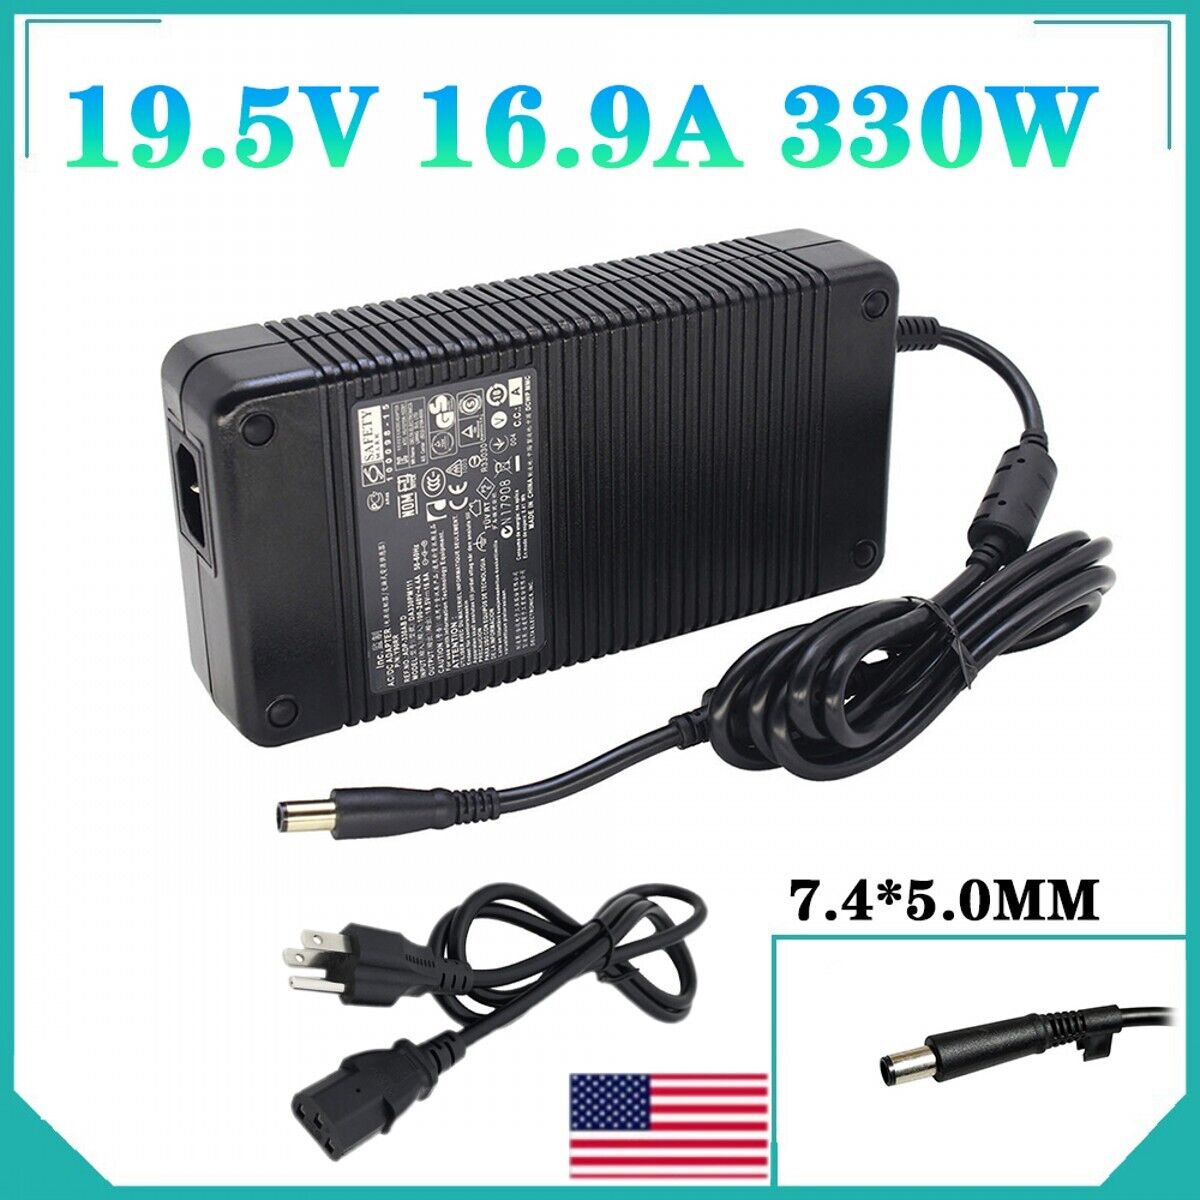 For Dell Alienware 15 17 R4 R5 M17 M18 PC 330w 16.8a Laptop Power Charger+Cord